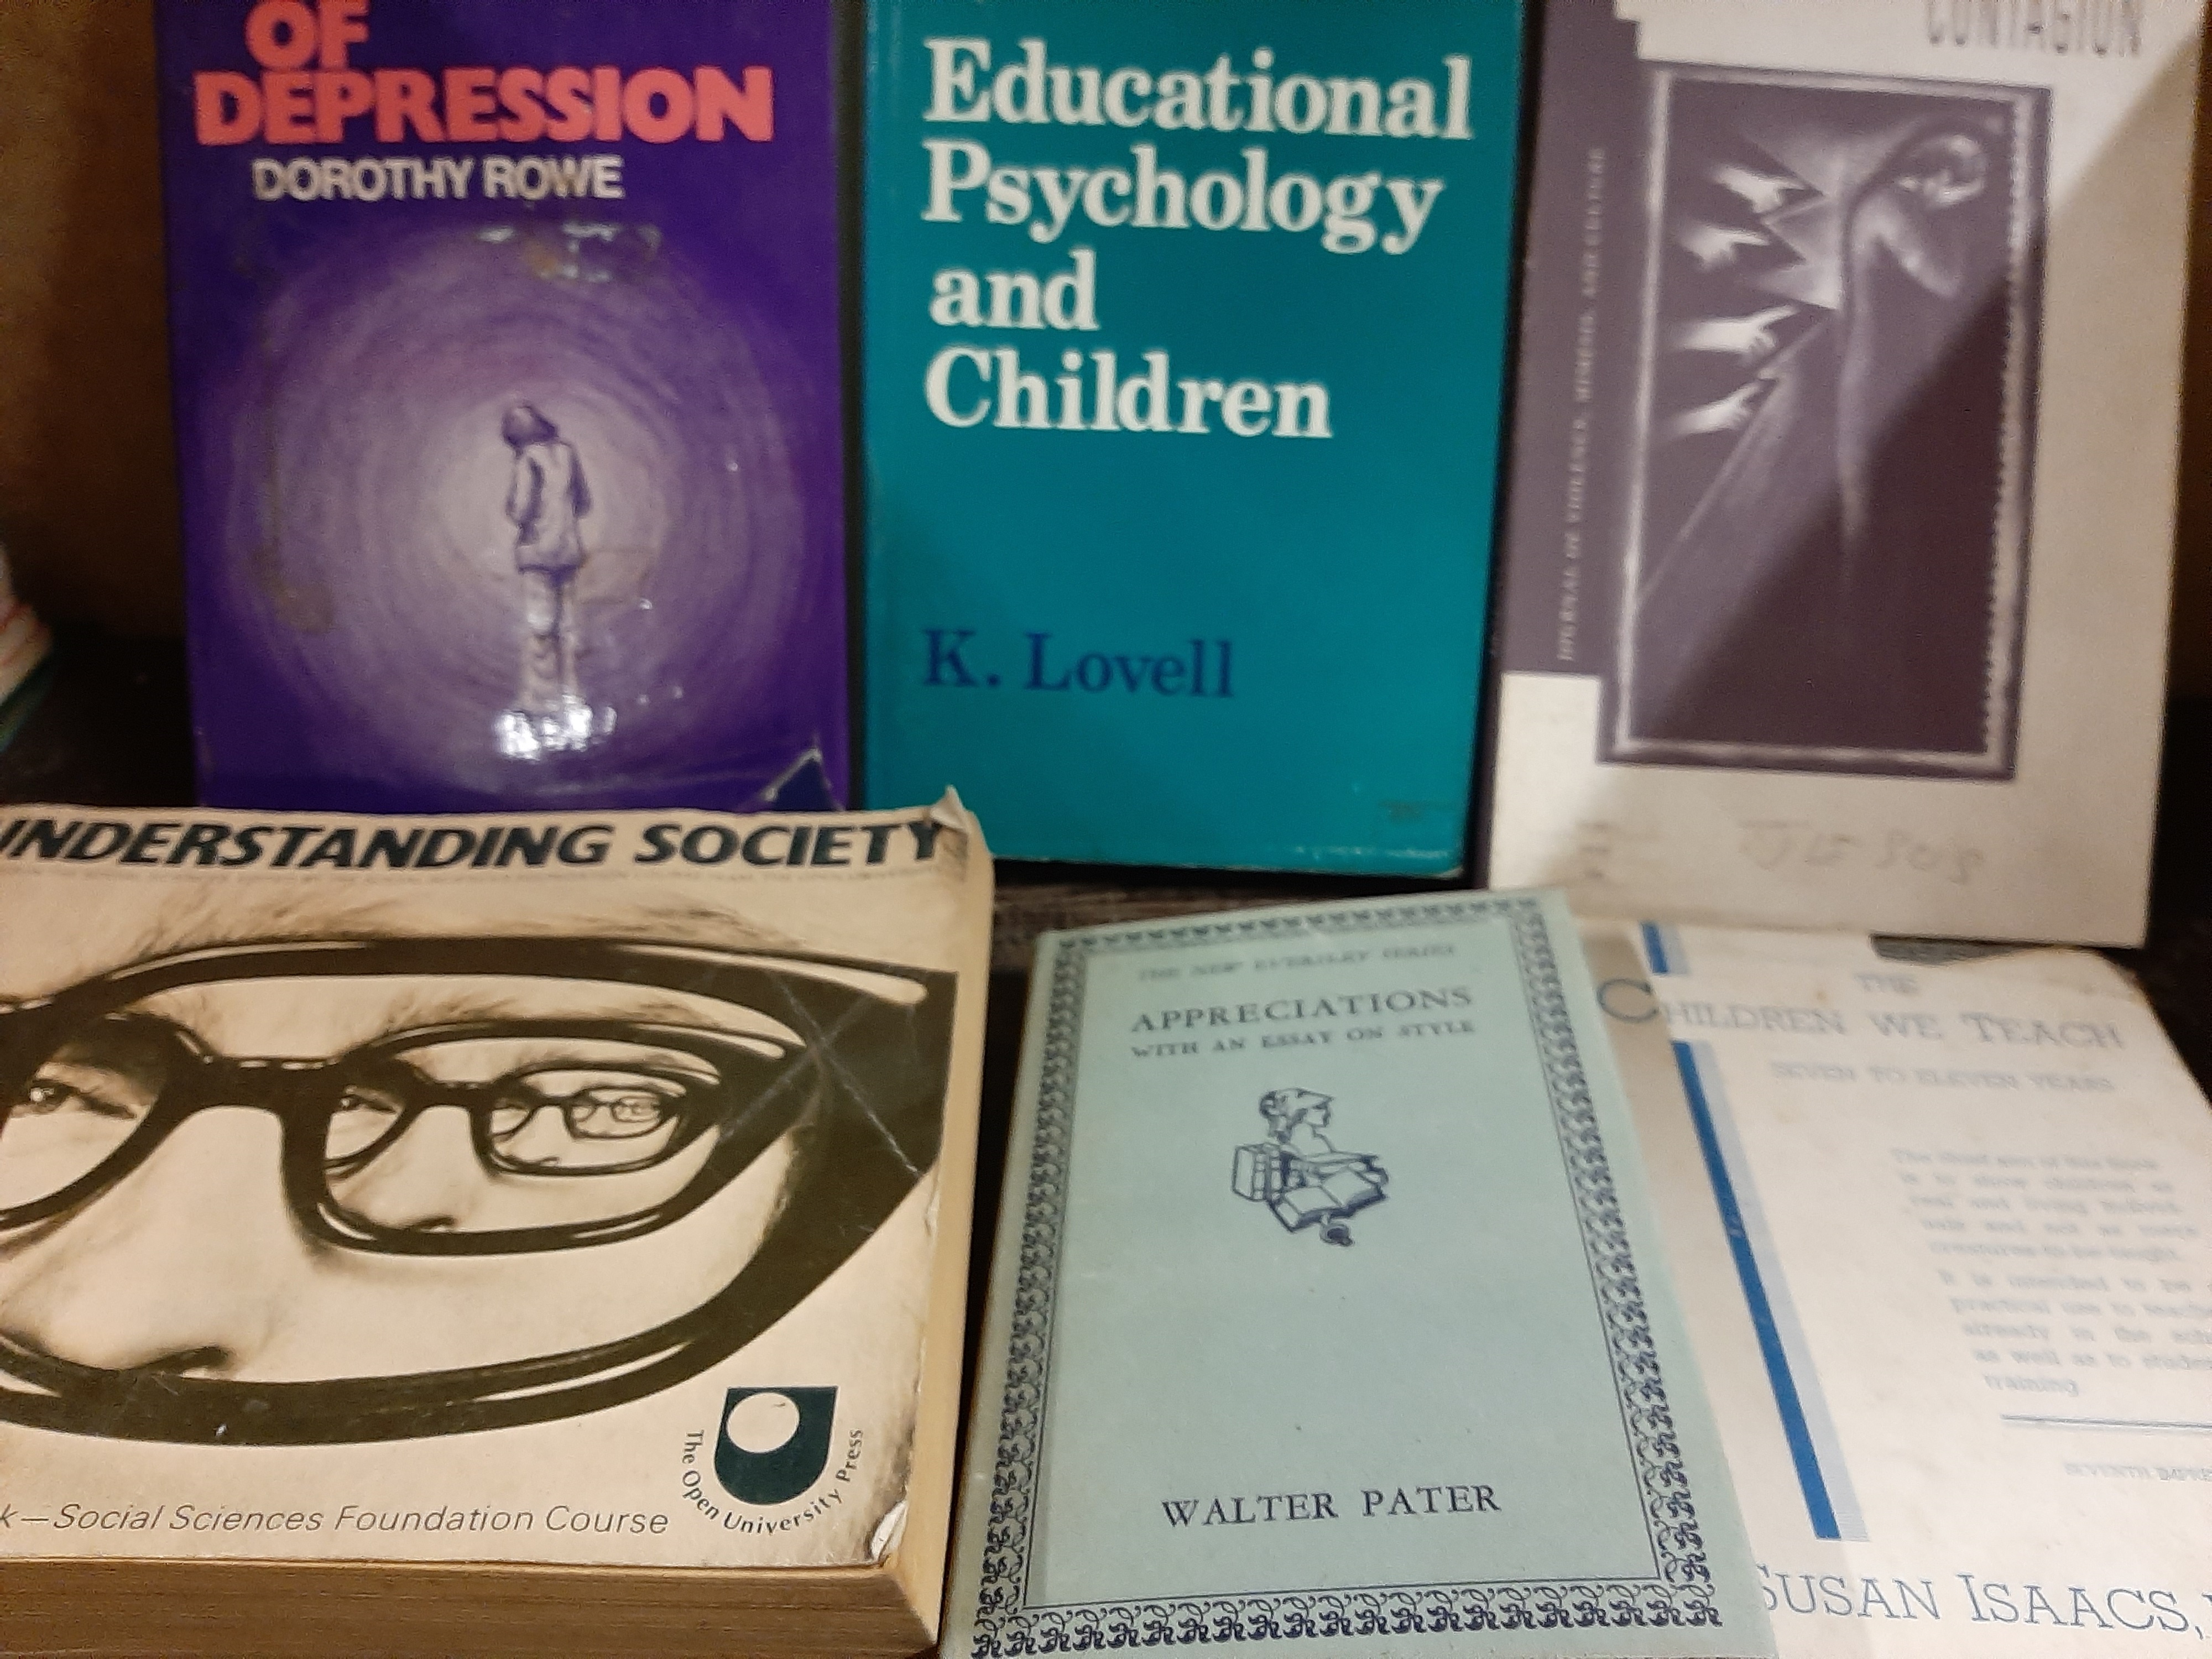 12 Sociology related books including Understanding Society, The Experience of Depression by